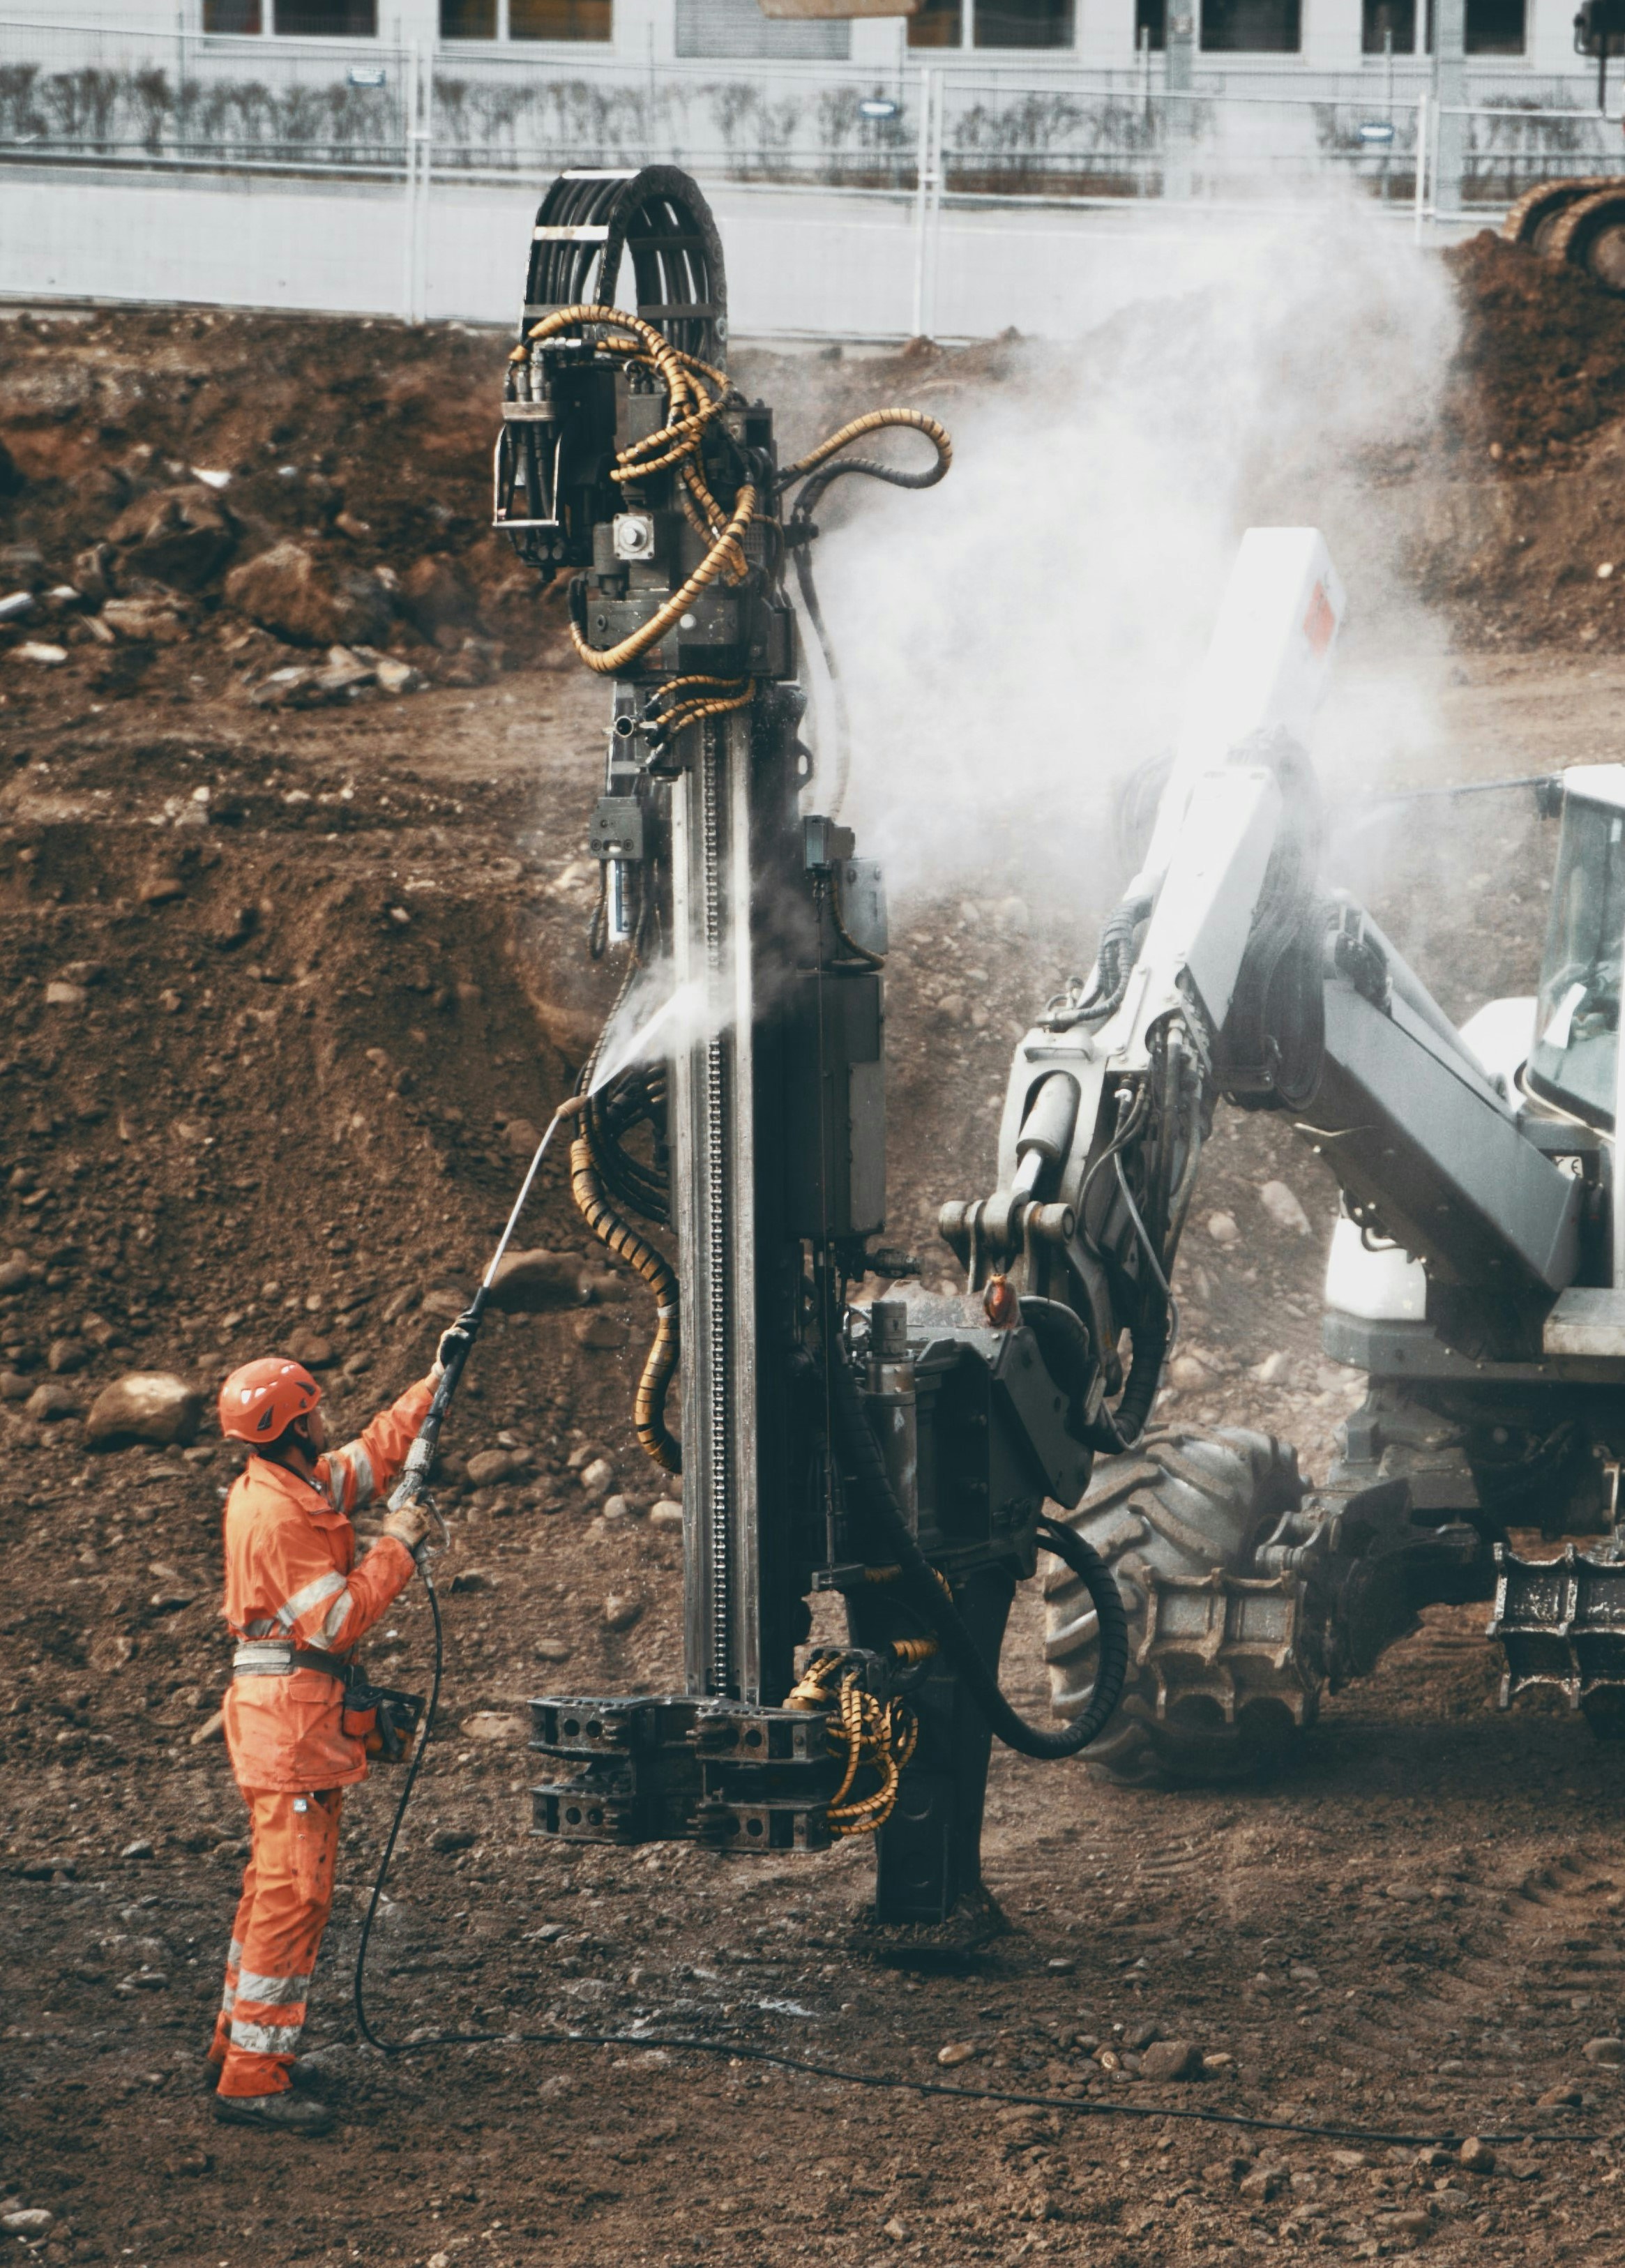 Tianhe's pneumatic rock drill in action at quarry